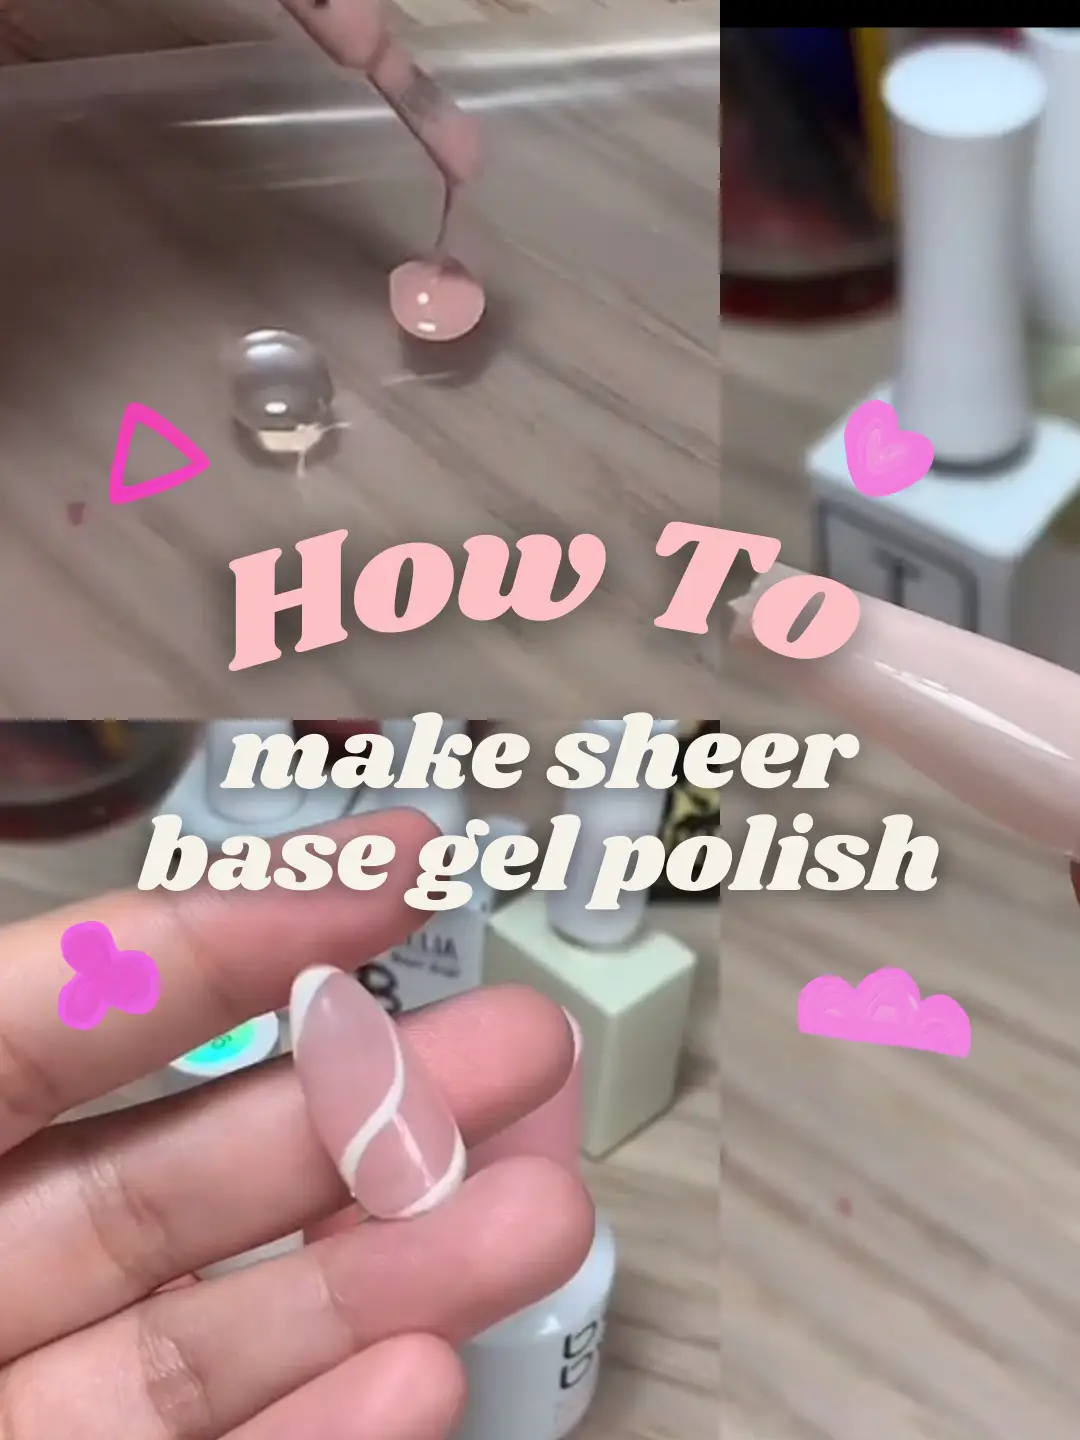 how to make sheer base gel polish 💅🏻, Gallery posted by farah